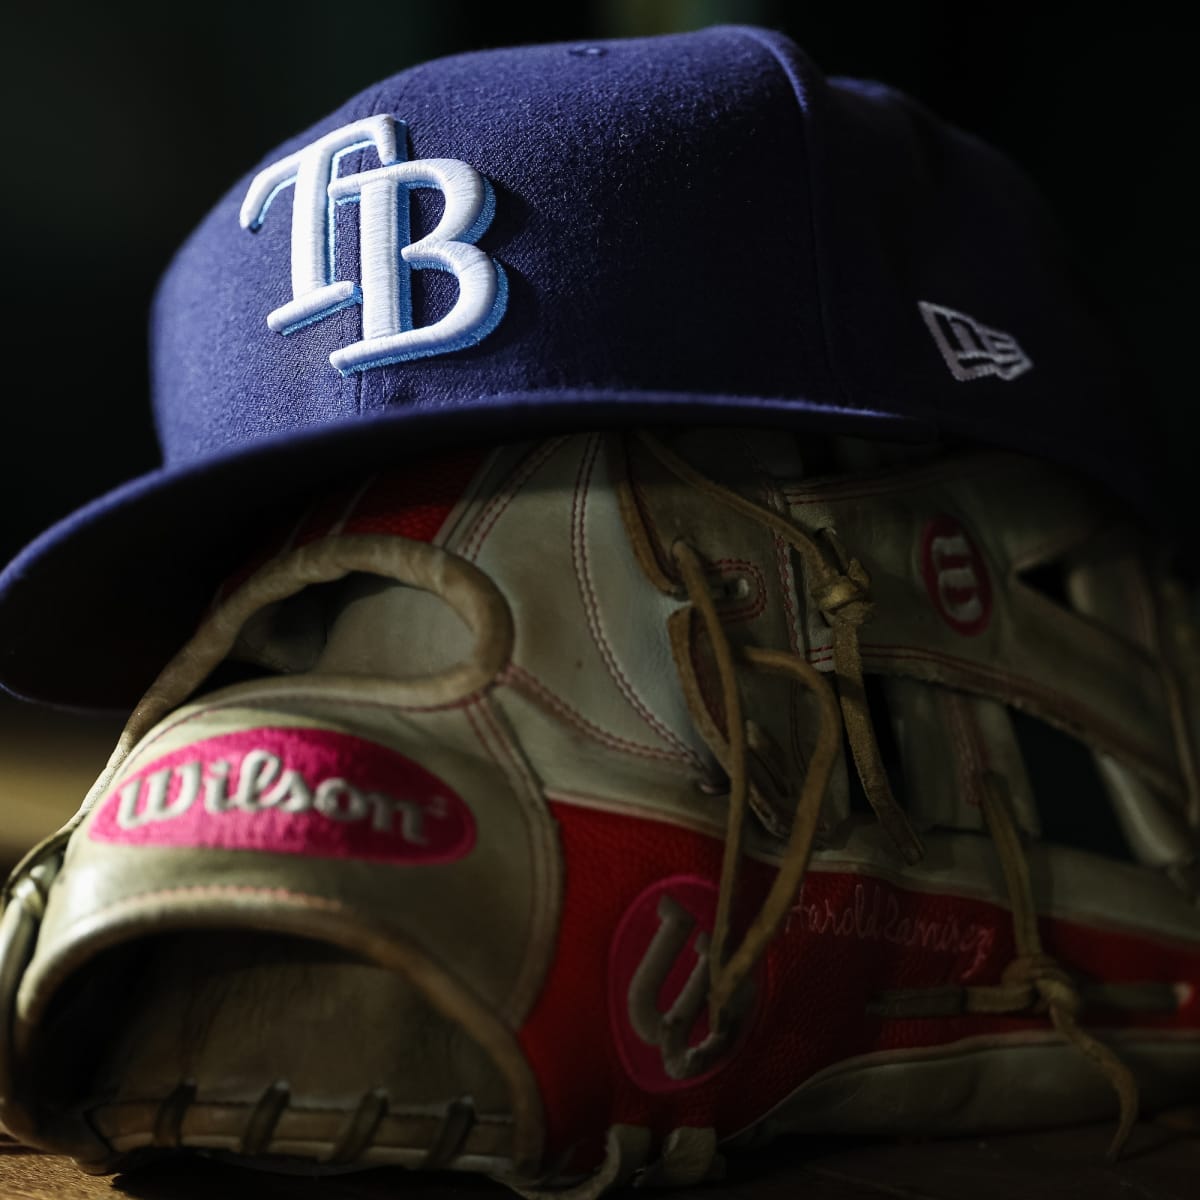 Rays prospect is considered the next great one